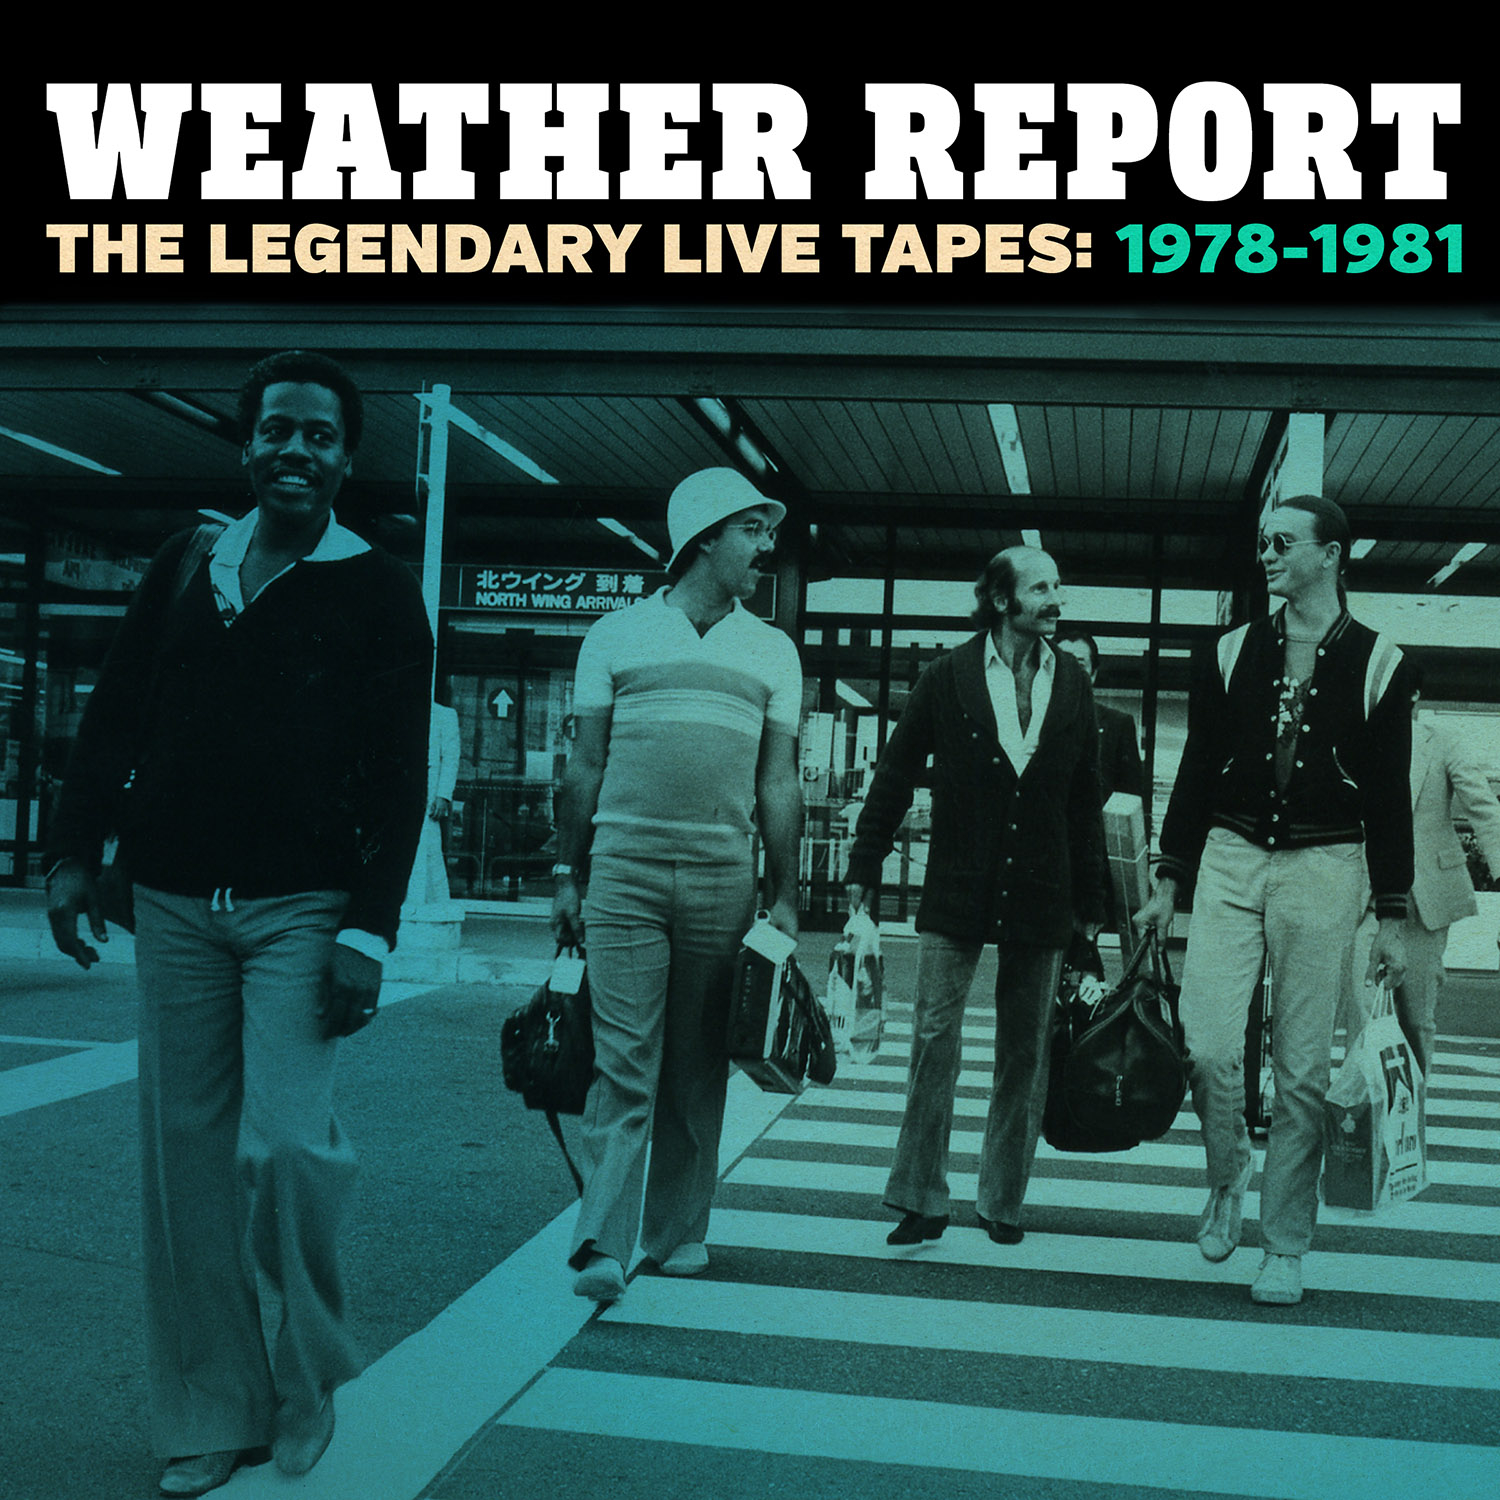 Weather Report - The Legendary Live Tapes 1978-1981 (2015) [HDTracks FLAC 24bit/96kHz]